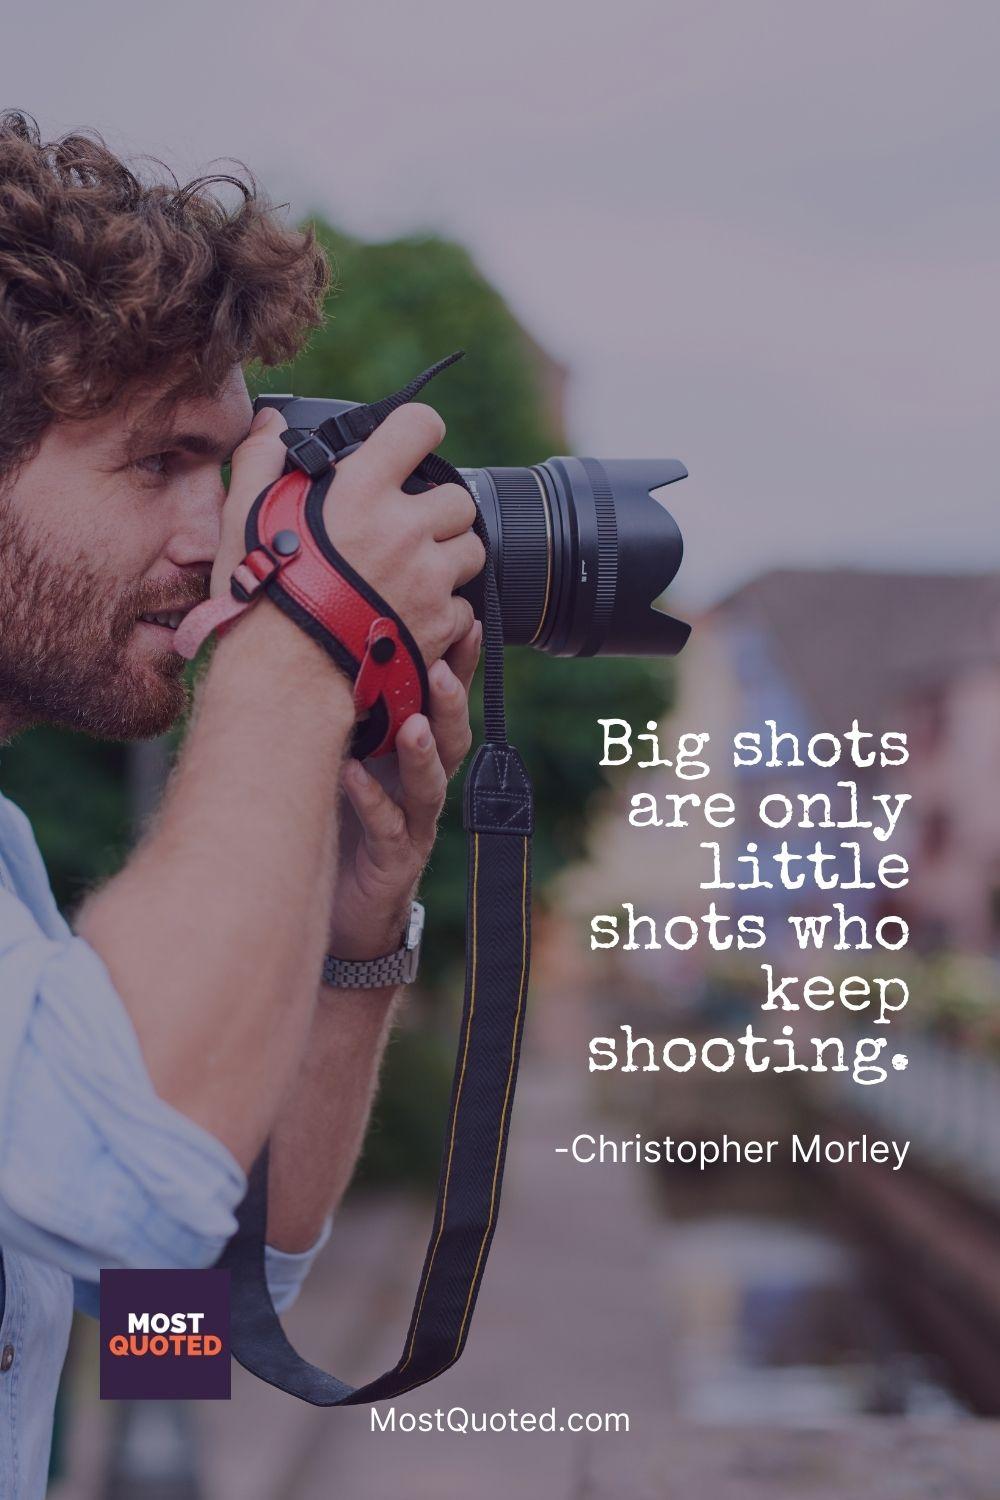 Big shots are only little shots who keep shooting. - Christopher Morley